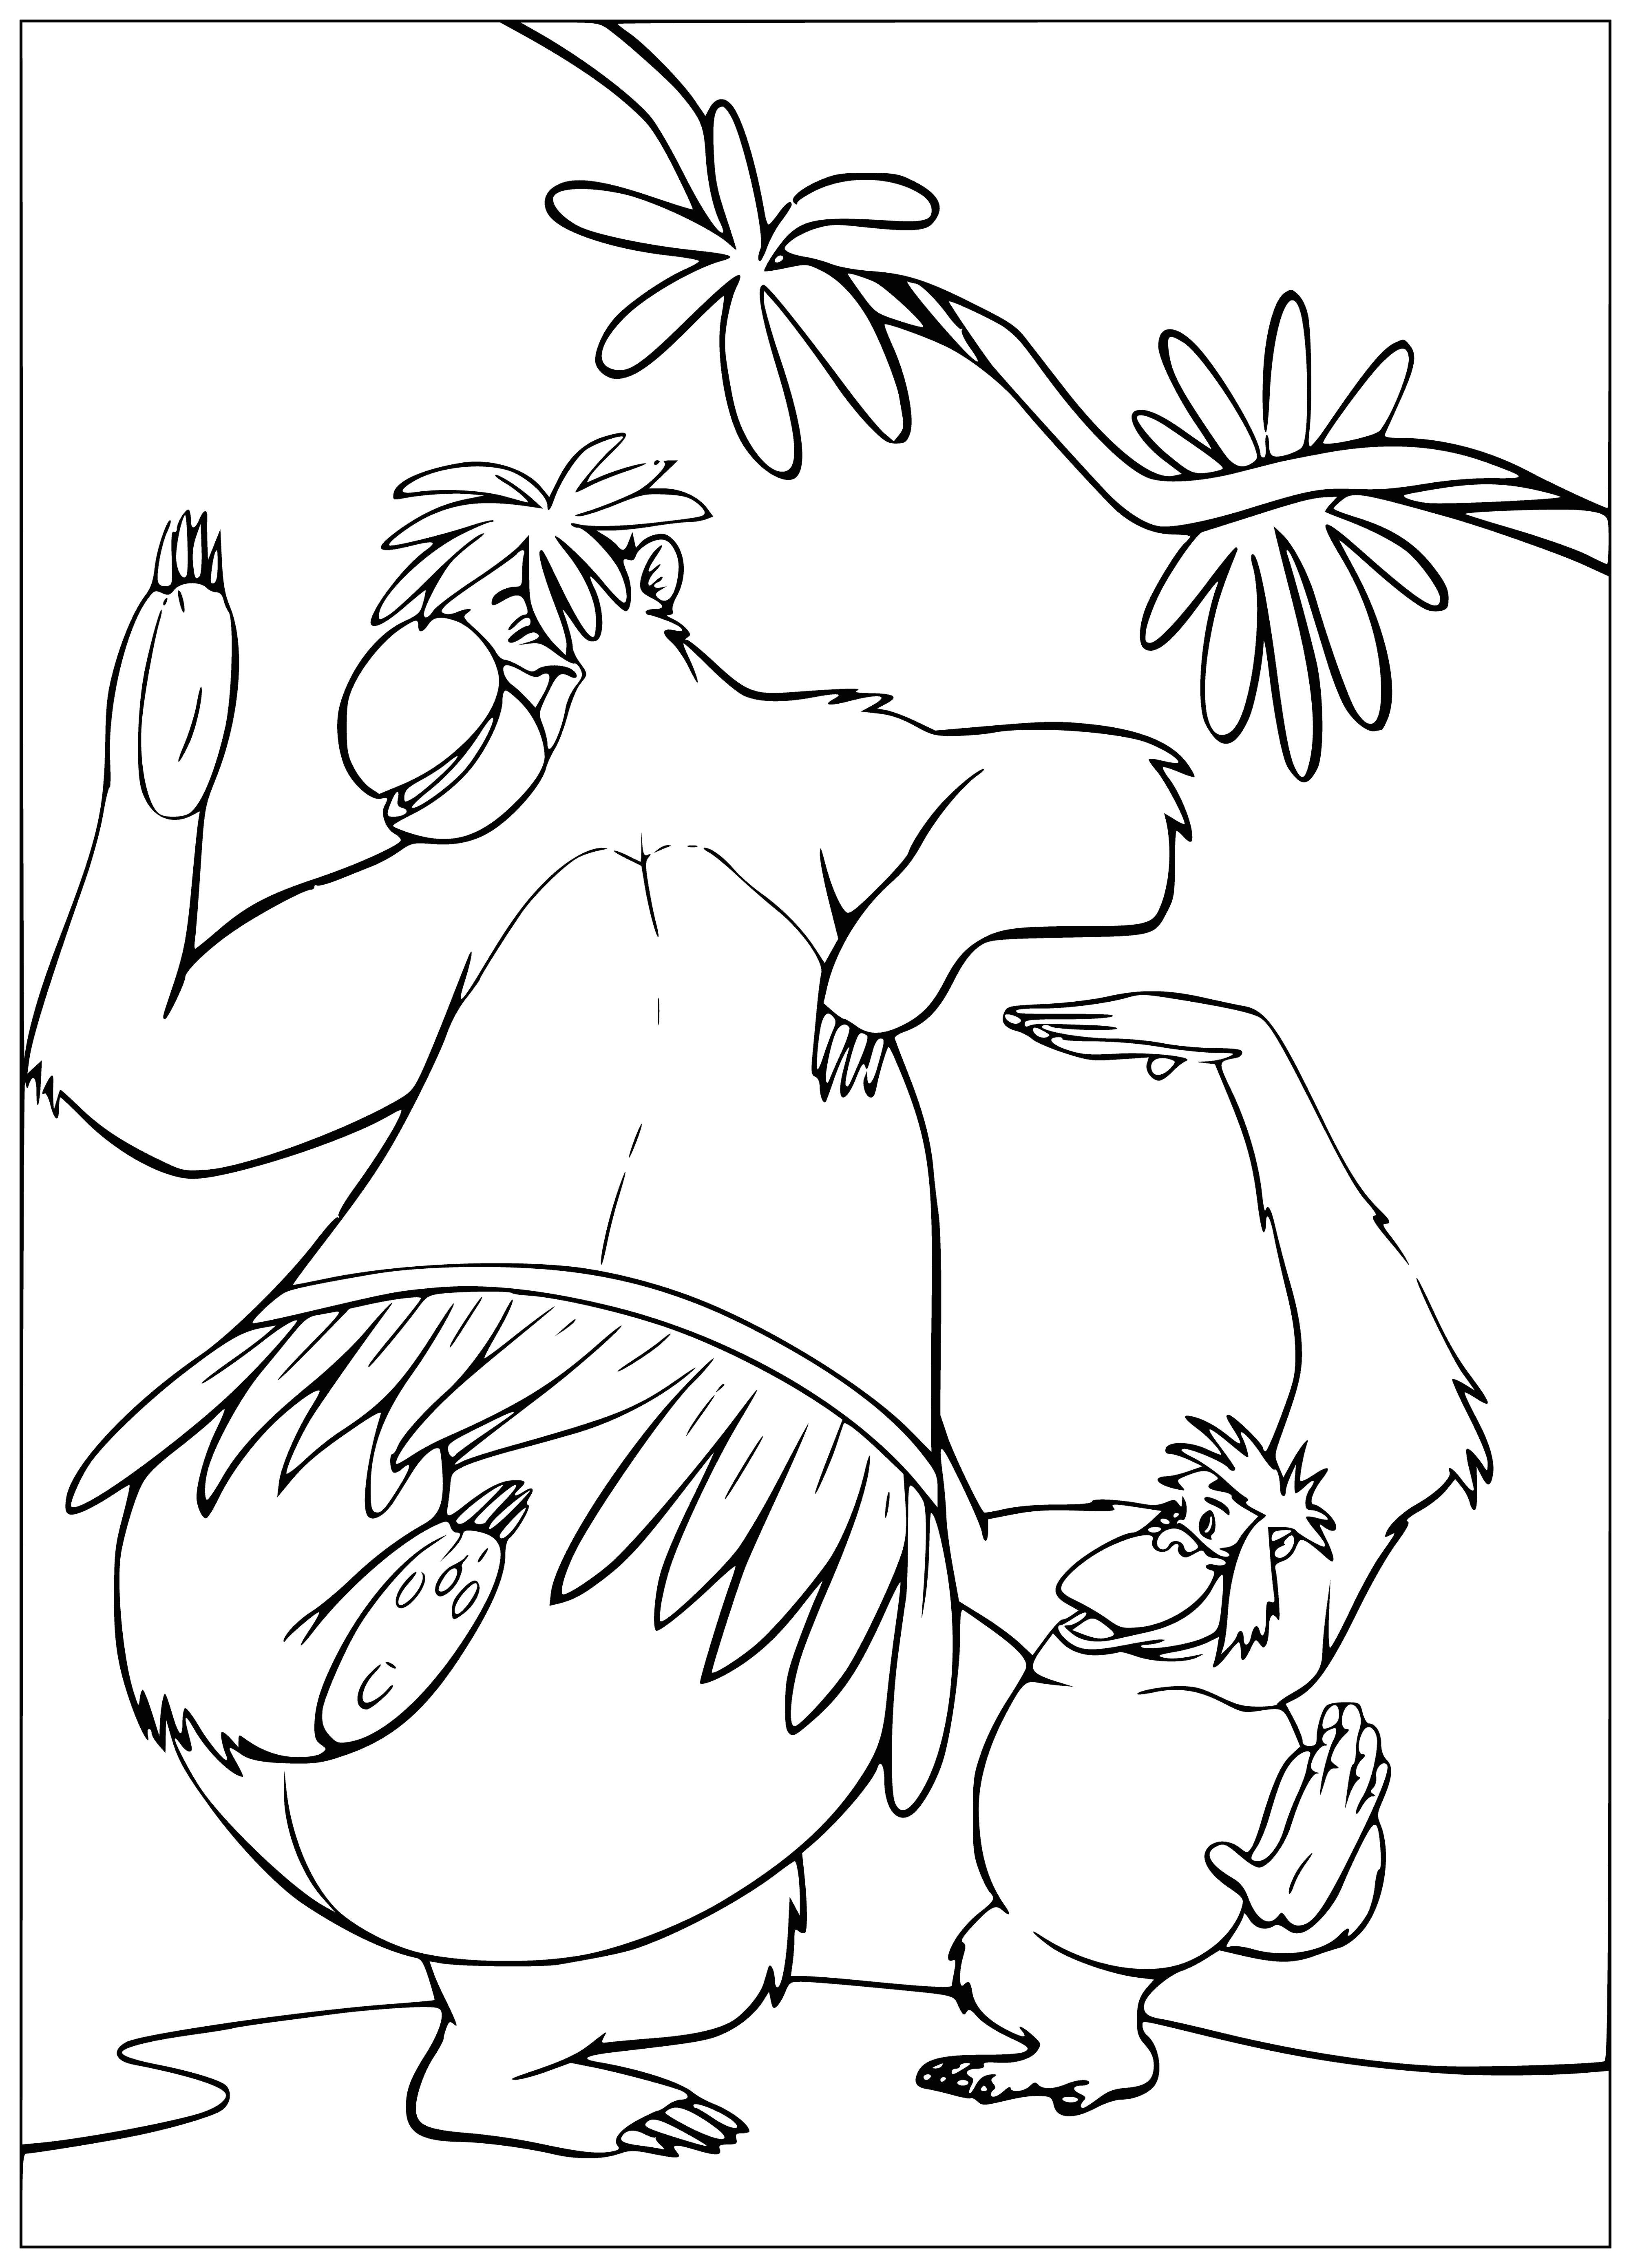 coloring page: Baloo dancing in the jungle, wearing a yellow & green shirt & a blue scarf. Arms & legs moving in time to the music.